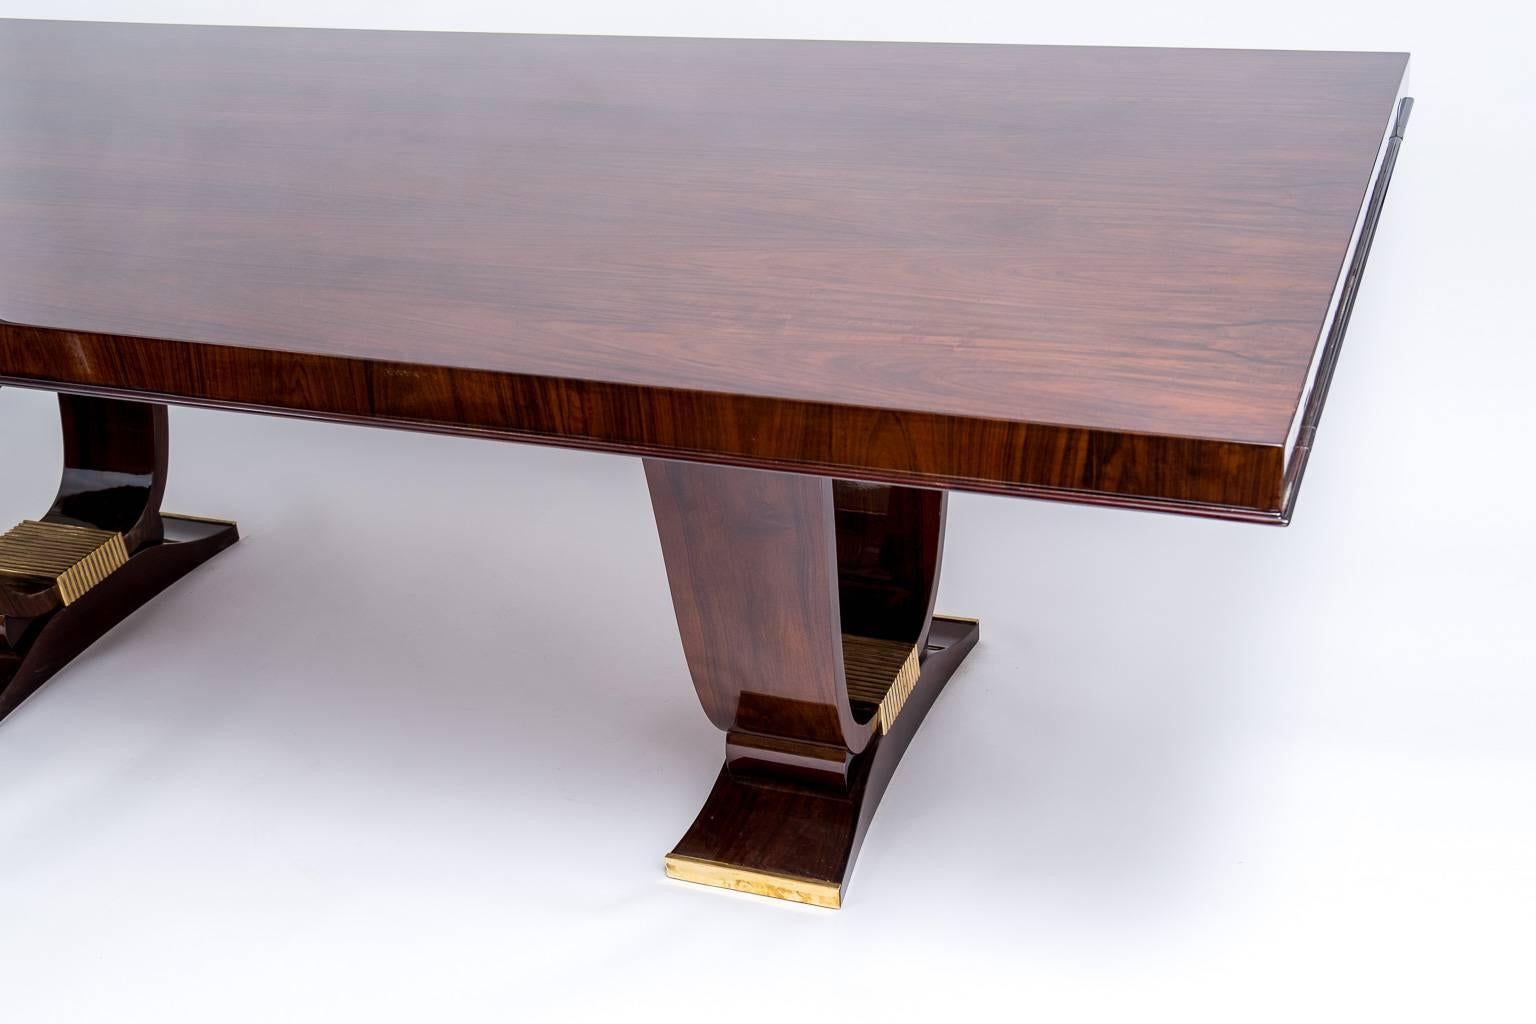 Mid-20th Century French Art Deco Dining Table, circa 1940s For Sale